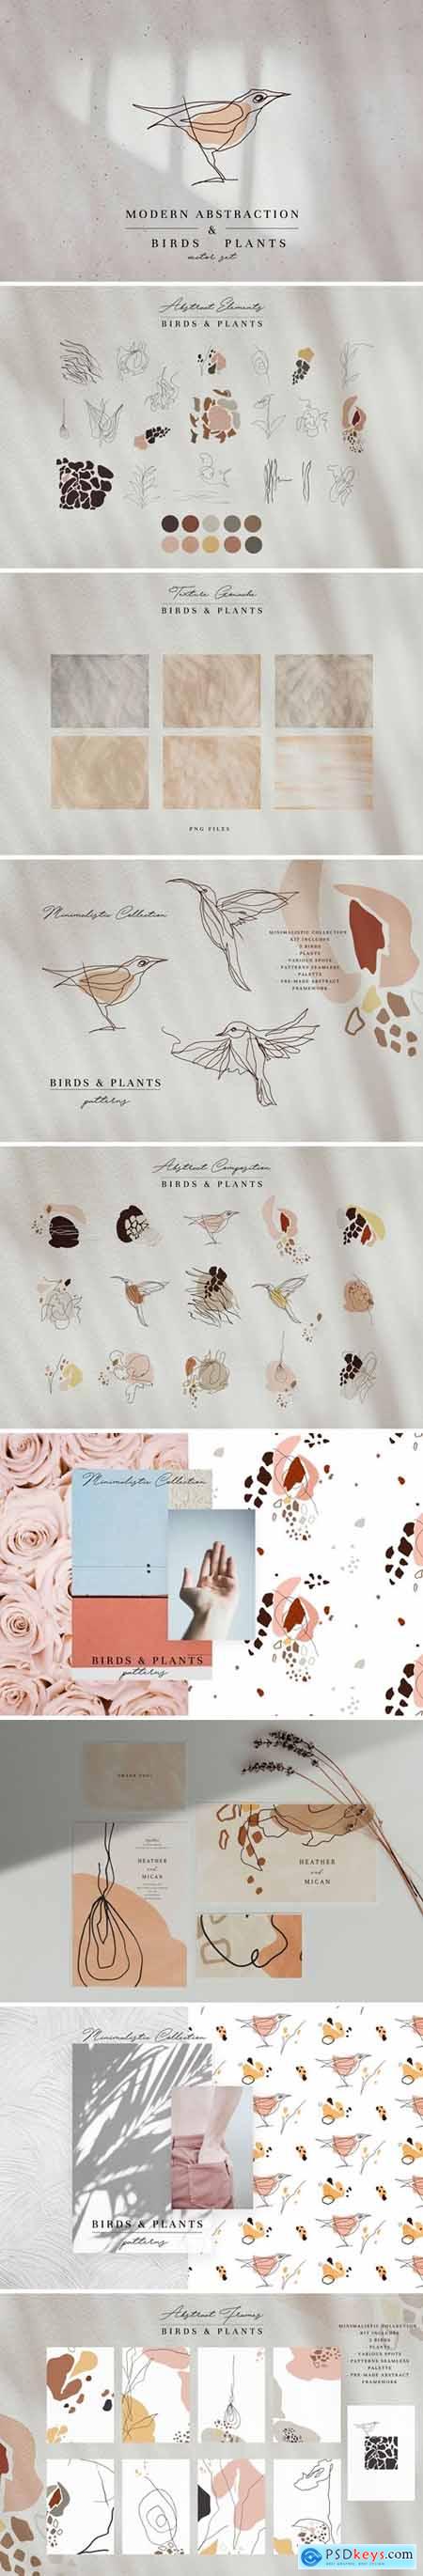 Animals » page 3 » Free Download Photoshop Vector Stock image Via ...